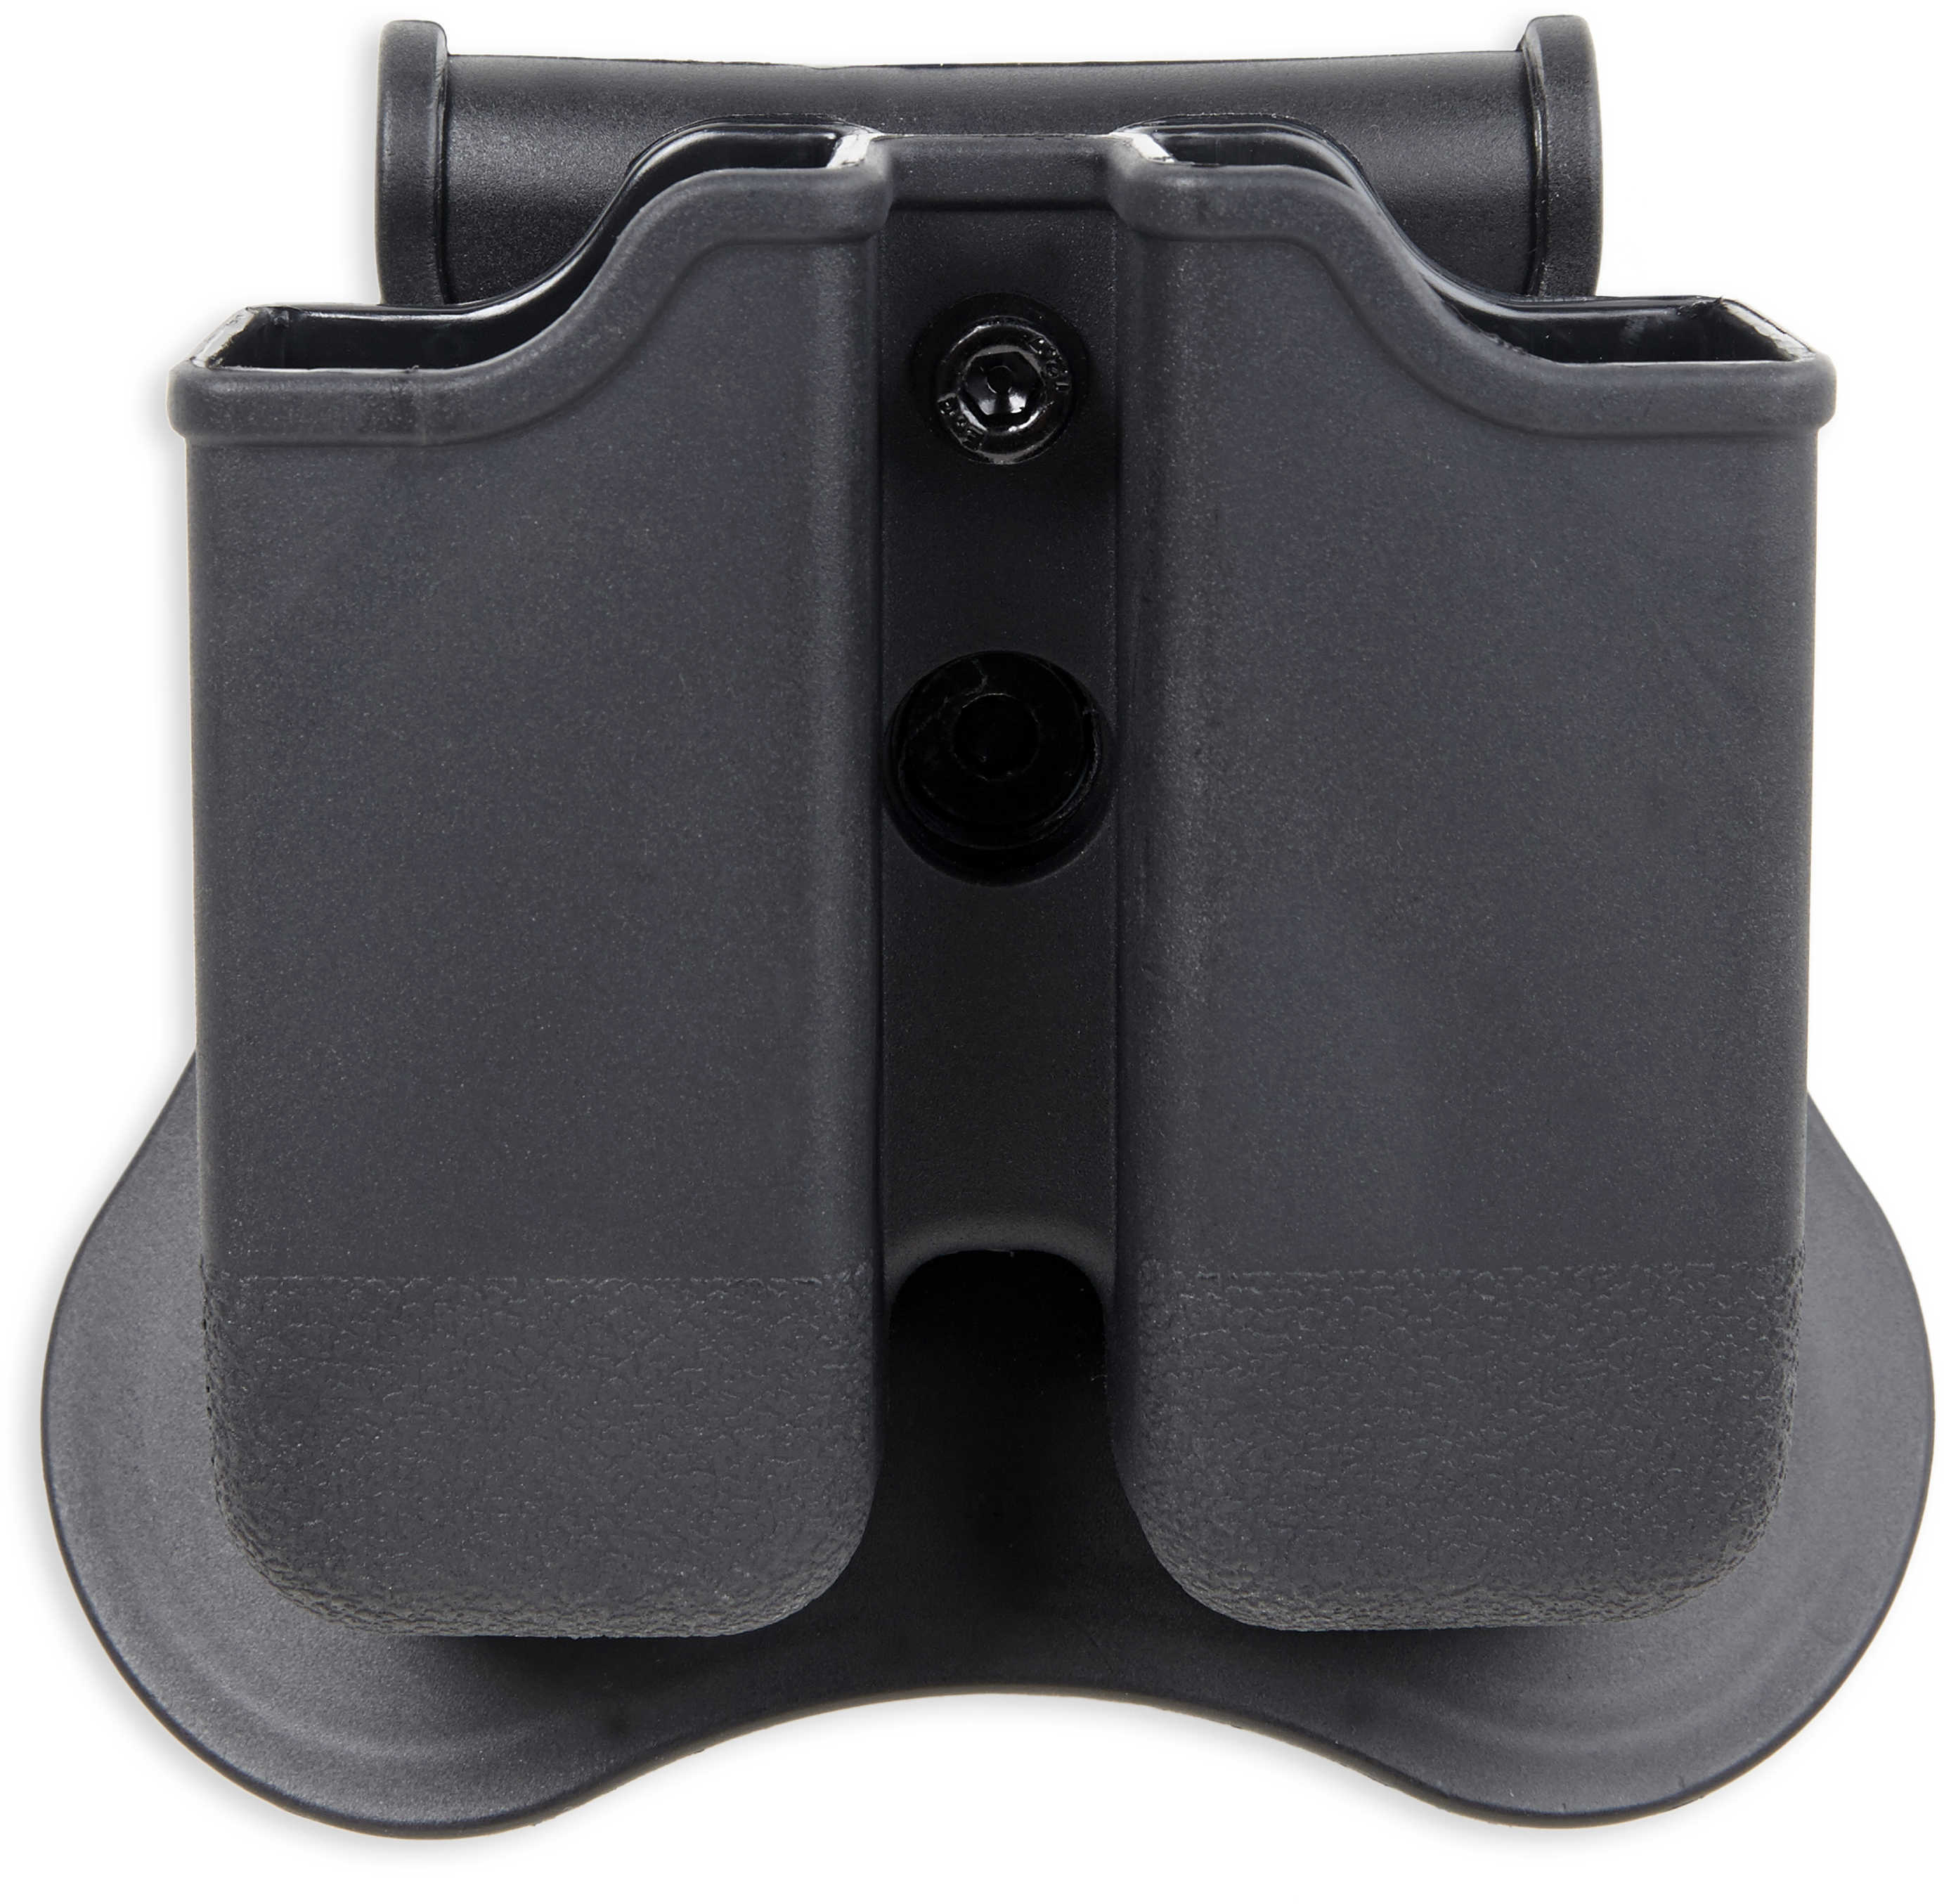 Bulldog Cases P-GM Polymer Magazine Holder Includes Paddle Attachment